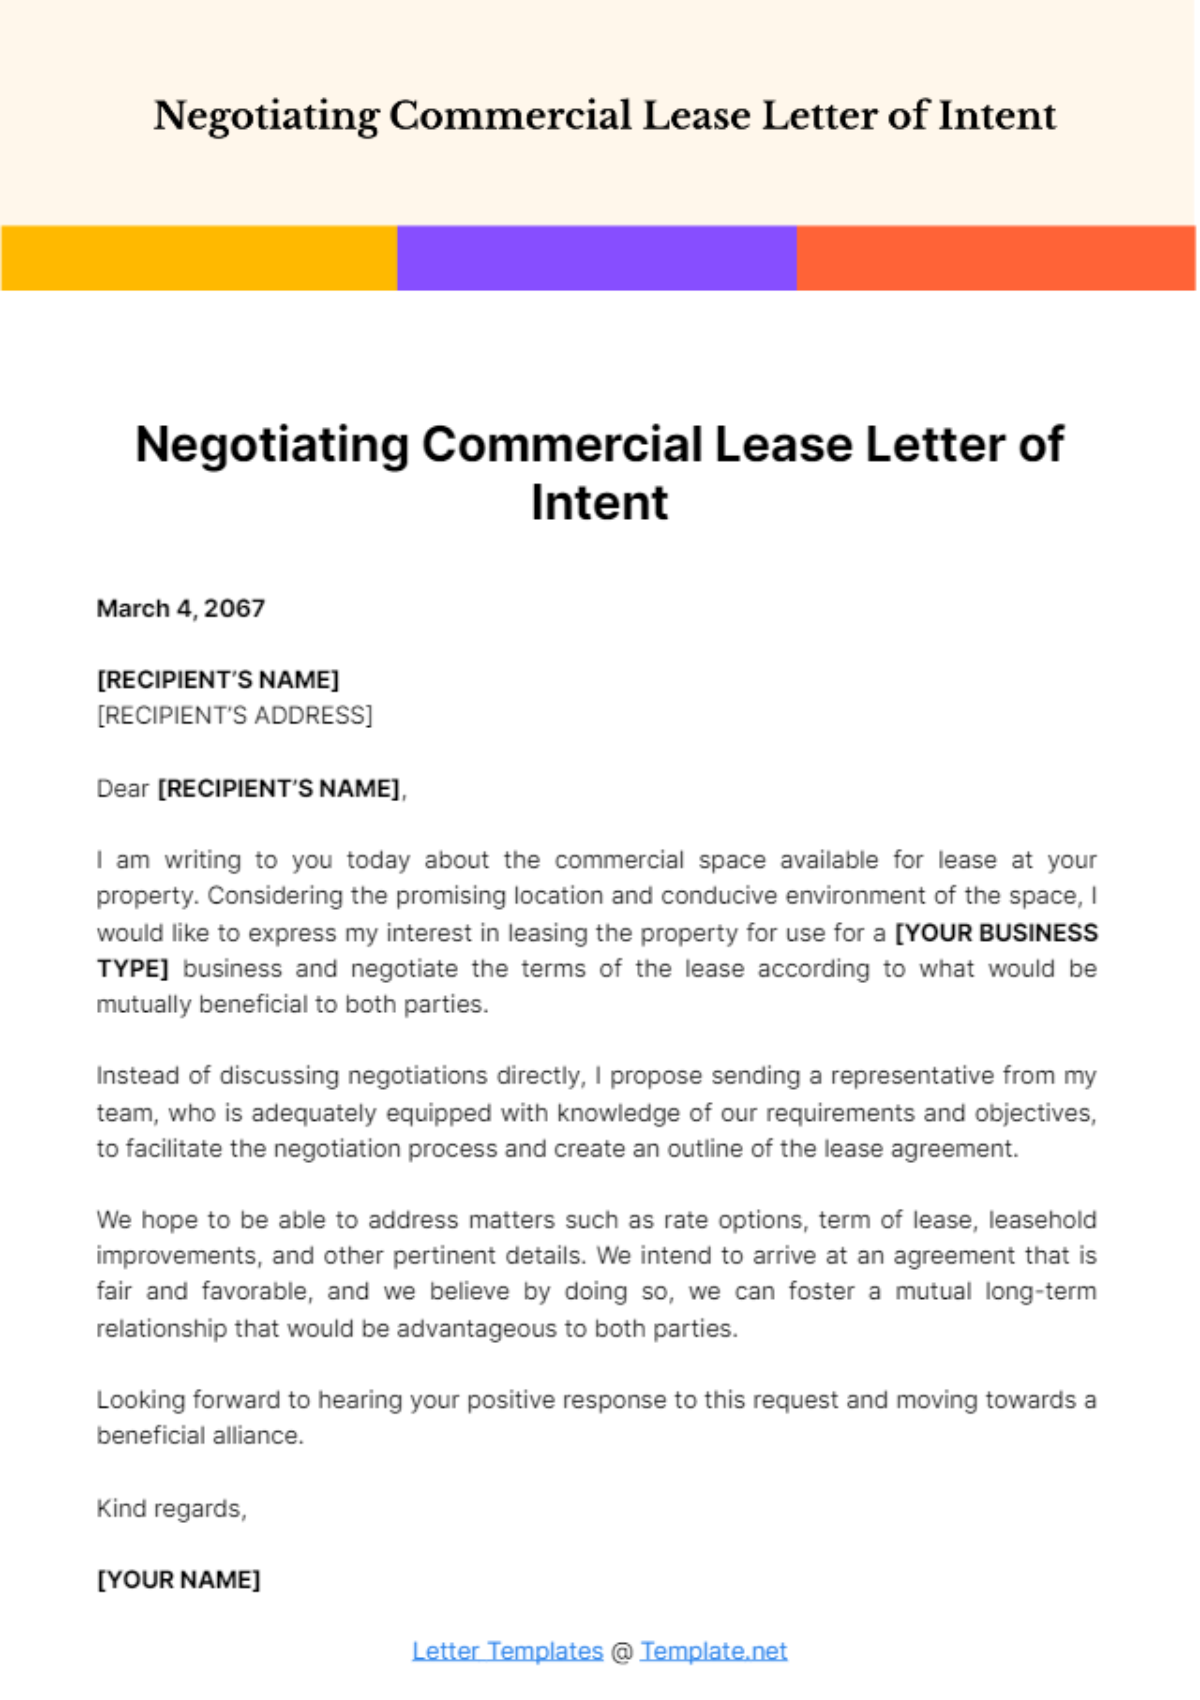 Free Negotiating Commercial Lease Letter of Intent Template